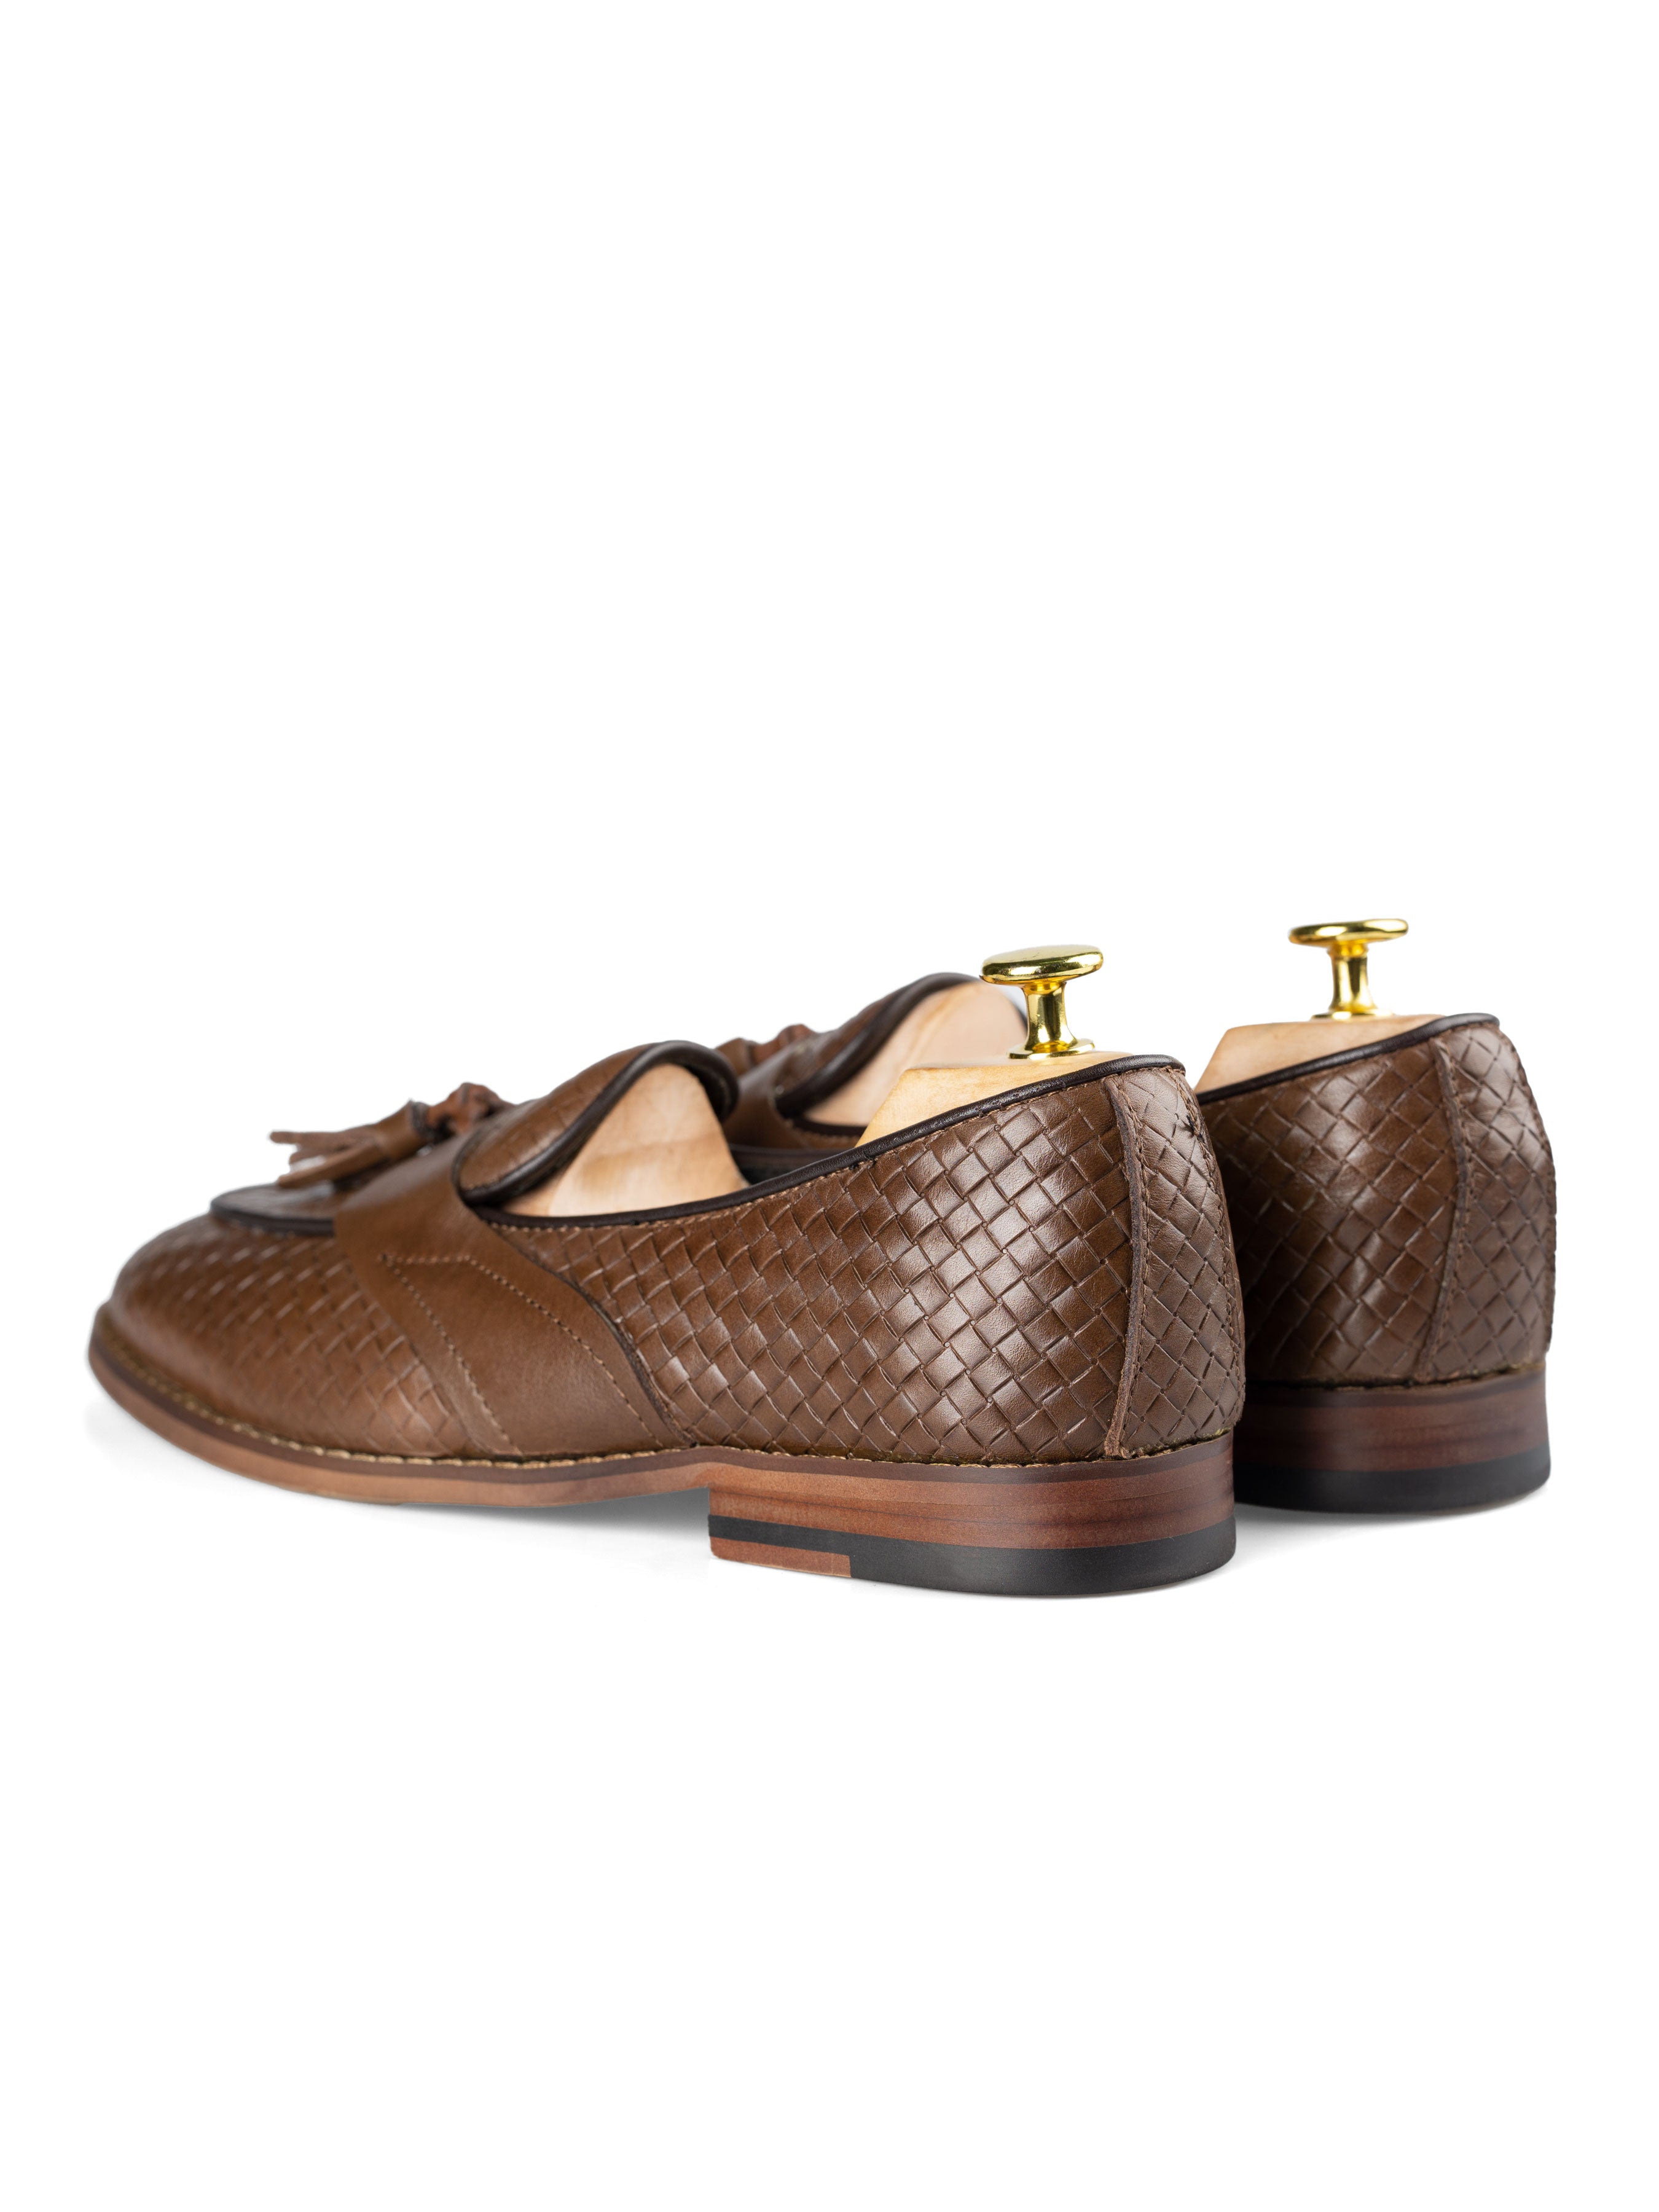 Belgian Loafer Tassel - Coffee Woven Leather with Solid Strap - Zeve Shoes